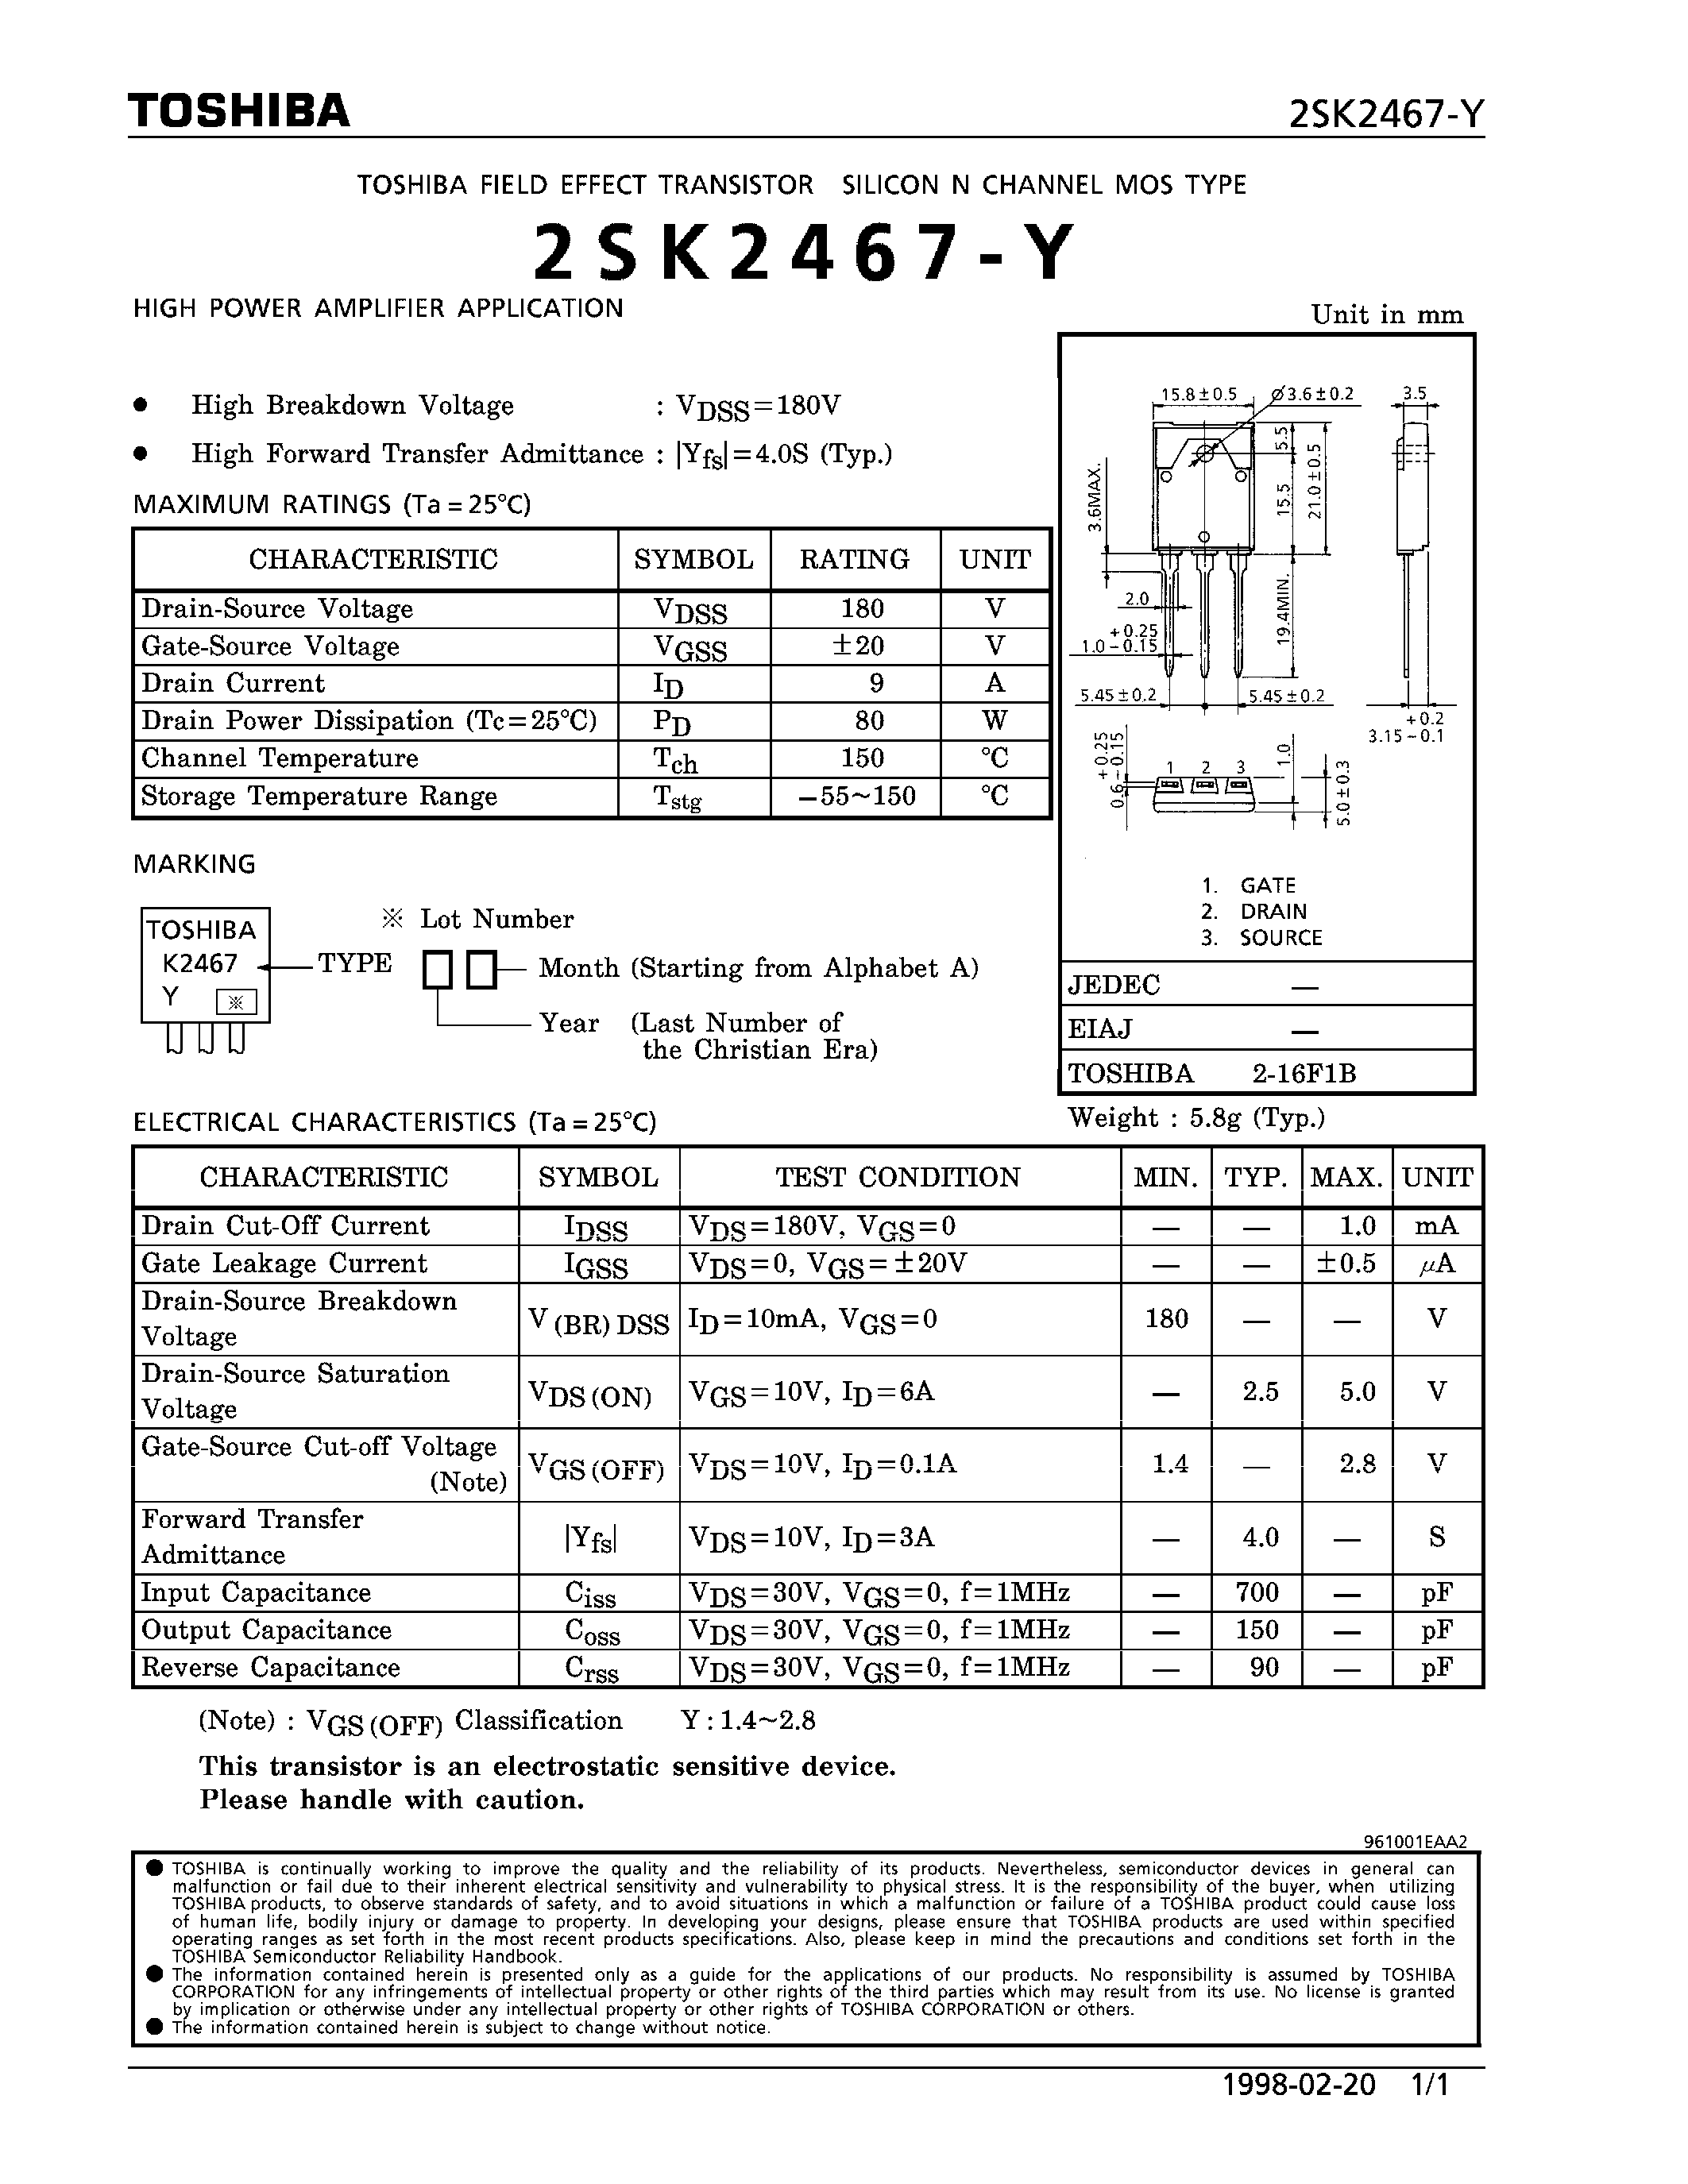 Datasheet 2SK2467-Y - N CHANNEL MOS TYPE (HIGH POWER AMPLIFIER APPLICATIONS) page 1